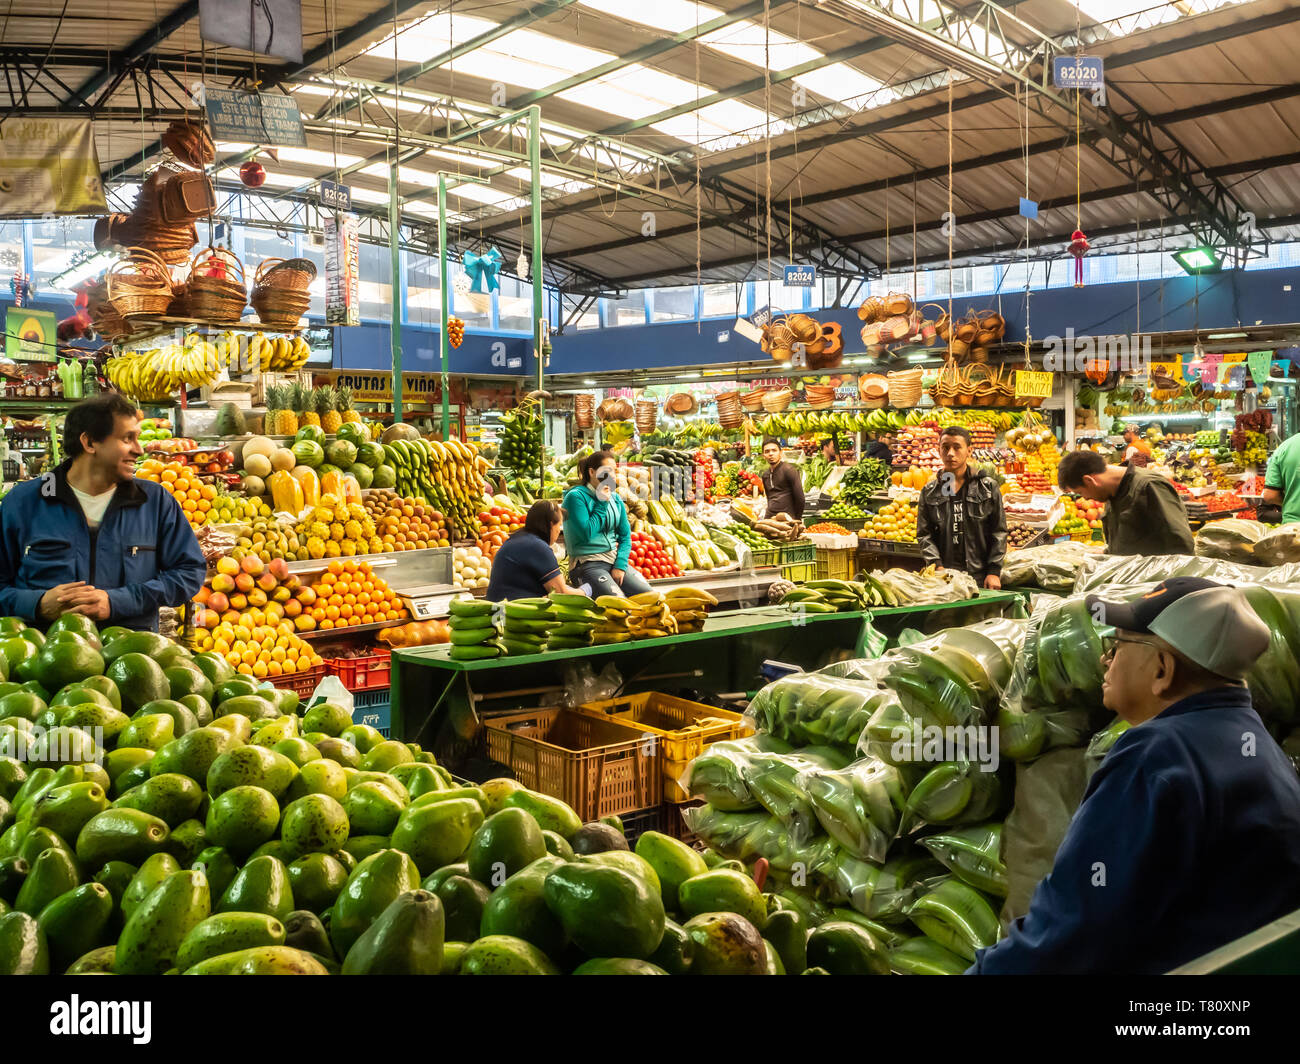 The produce section of Paloquemao market, Bogota, Colombia, South America Stock Photo